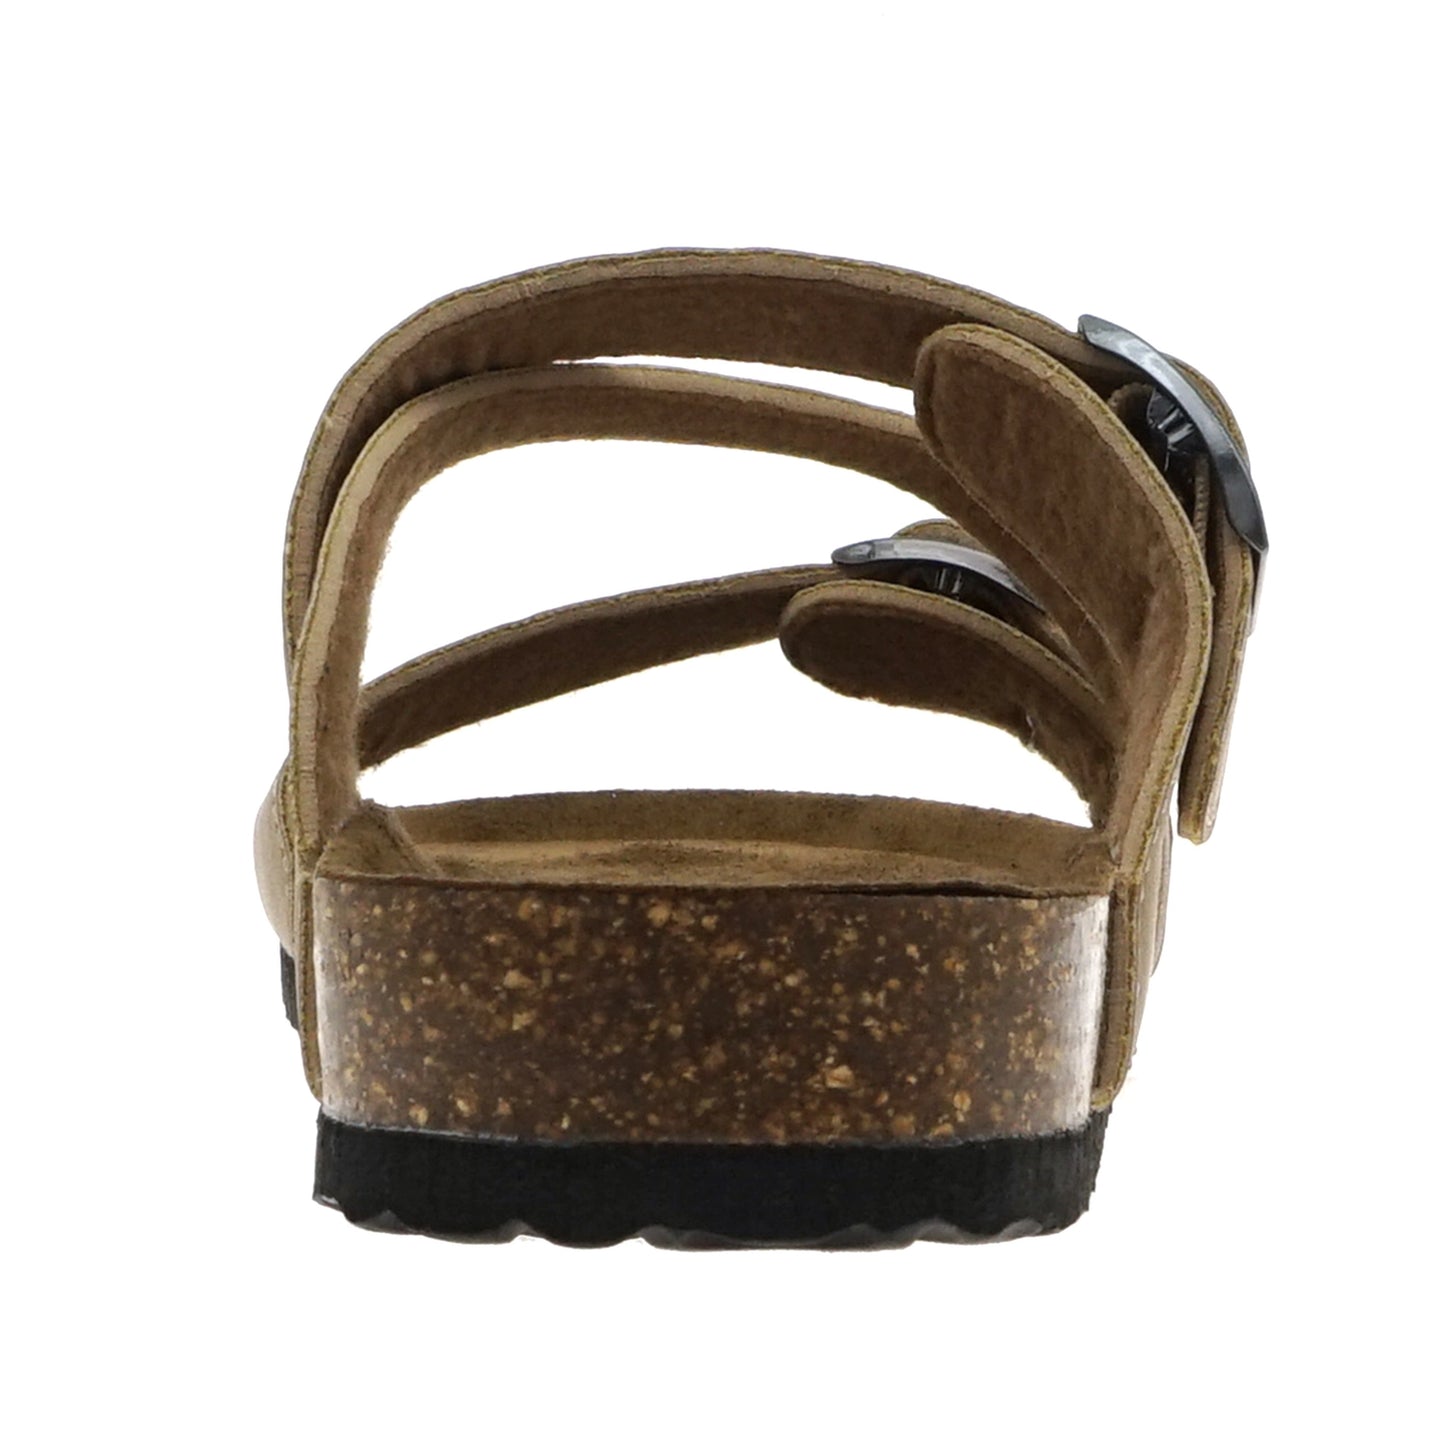 Outwoods Bork-56 Strappy Buckle Sandal